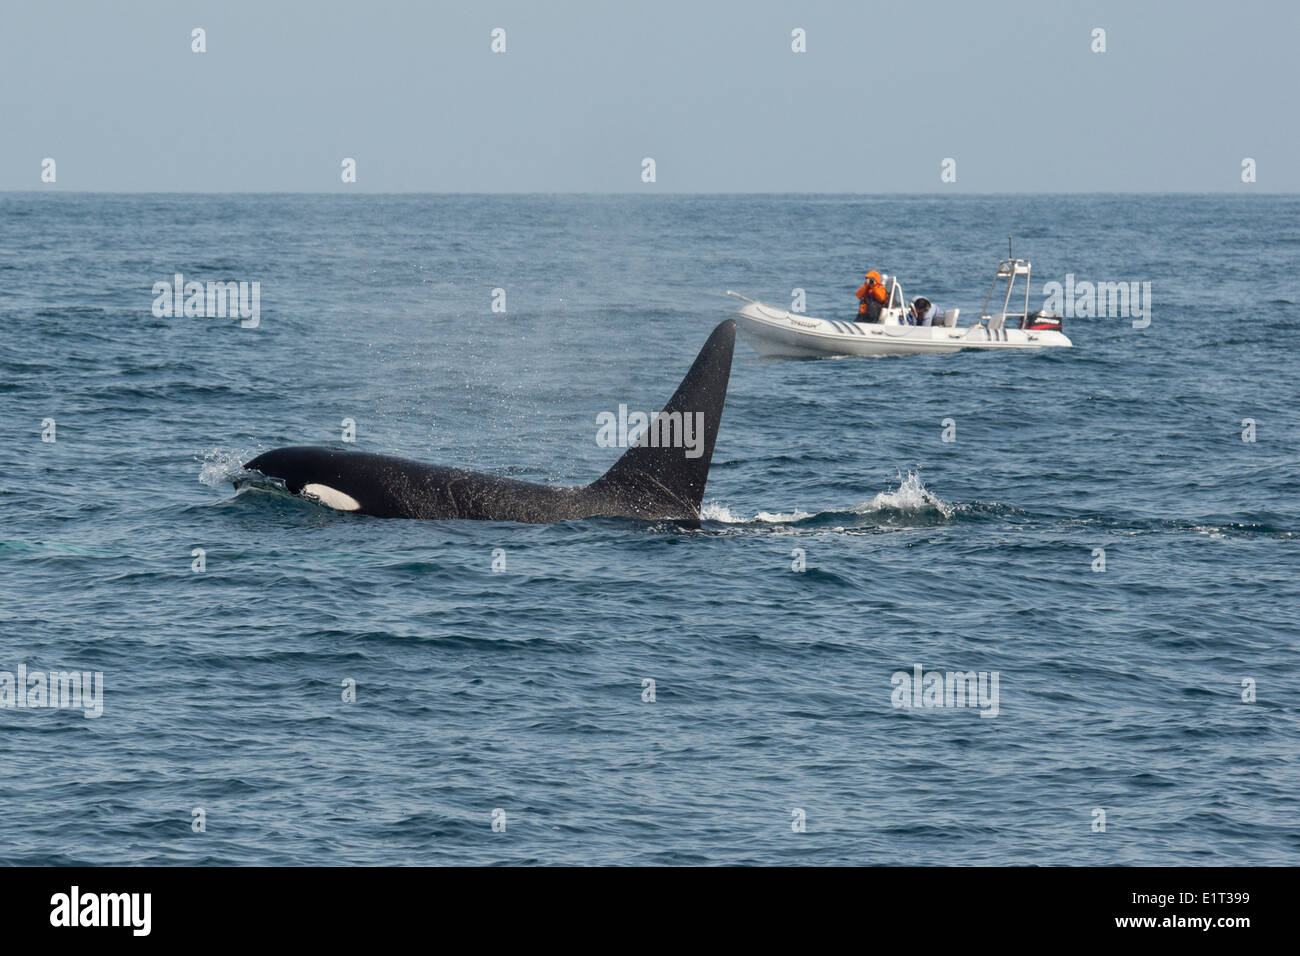 Male Transient/Biggs Killer Whale/Orca (Orcinus orca). Surfacing in front of whale watching boat, Monterey, Pacific Ocean. Stock Photo